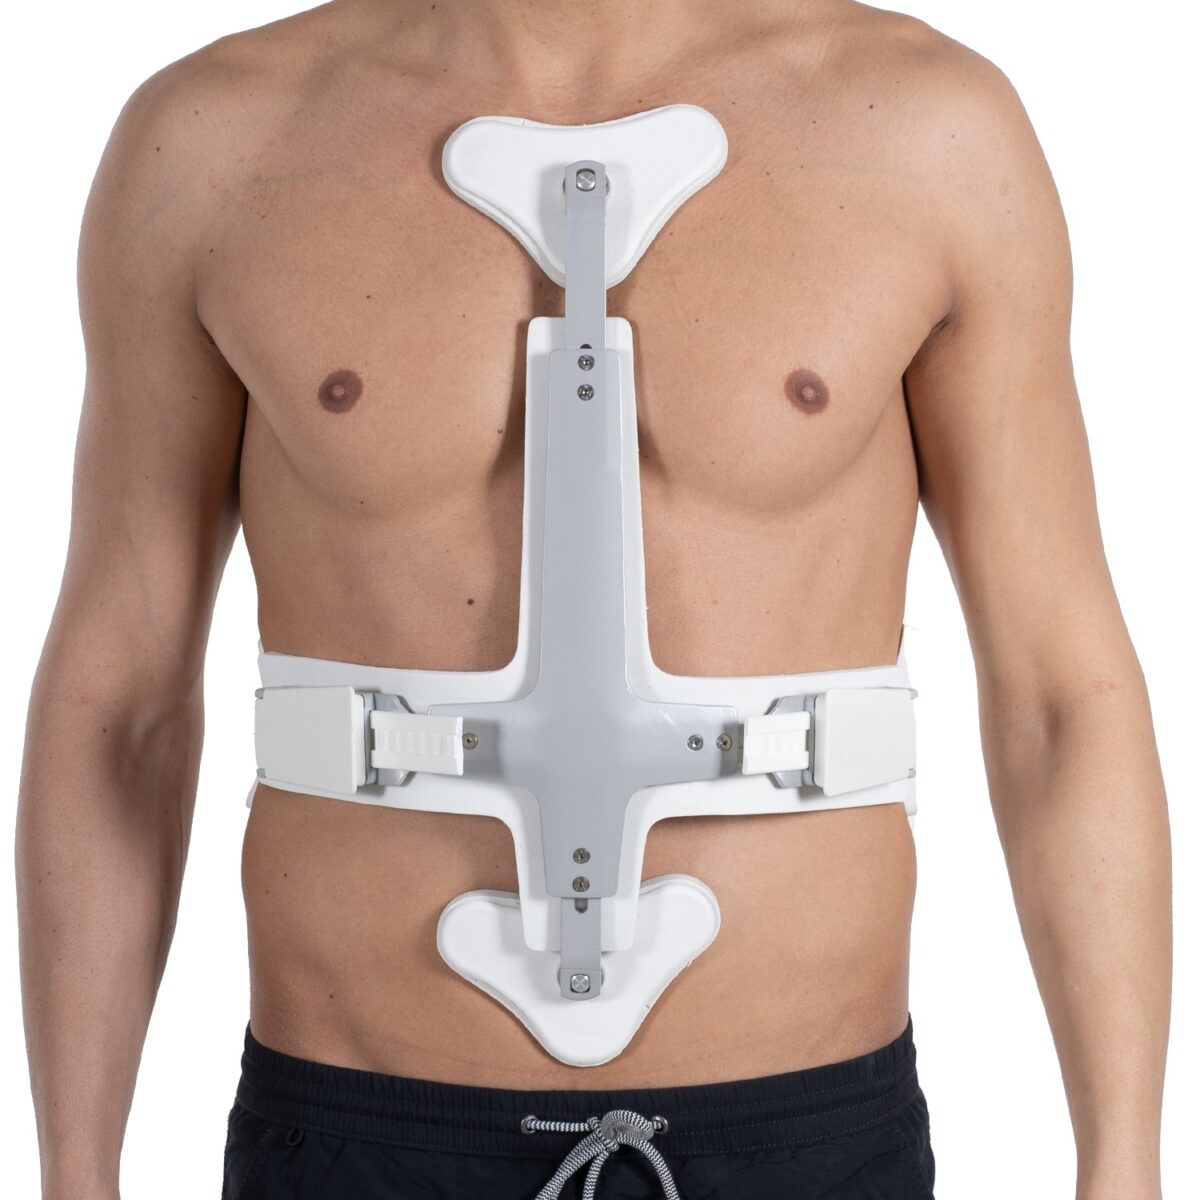 wingmed orthopedic equipments W449 hiperextension corset 3 points 45